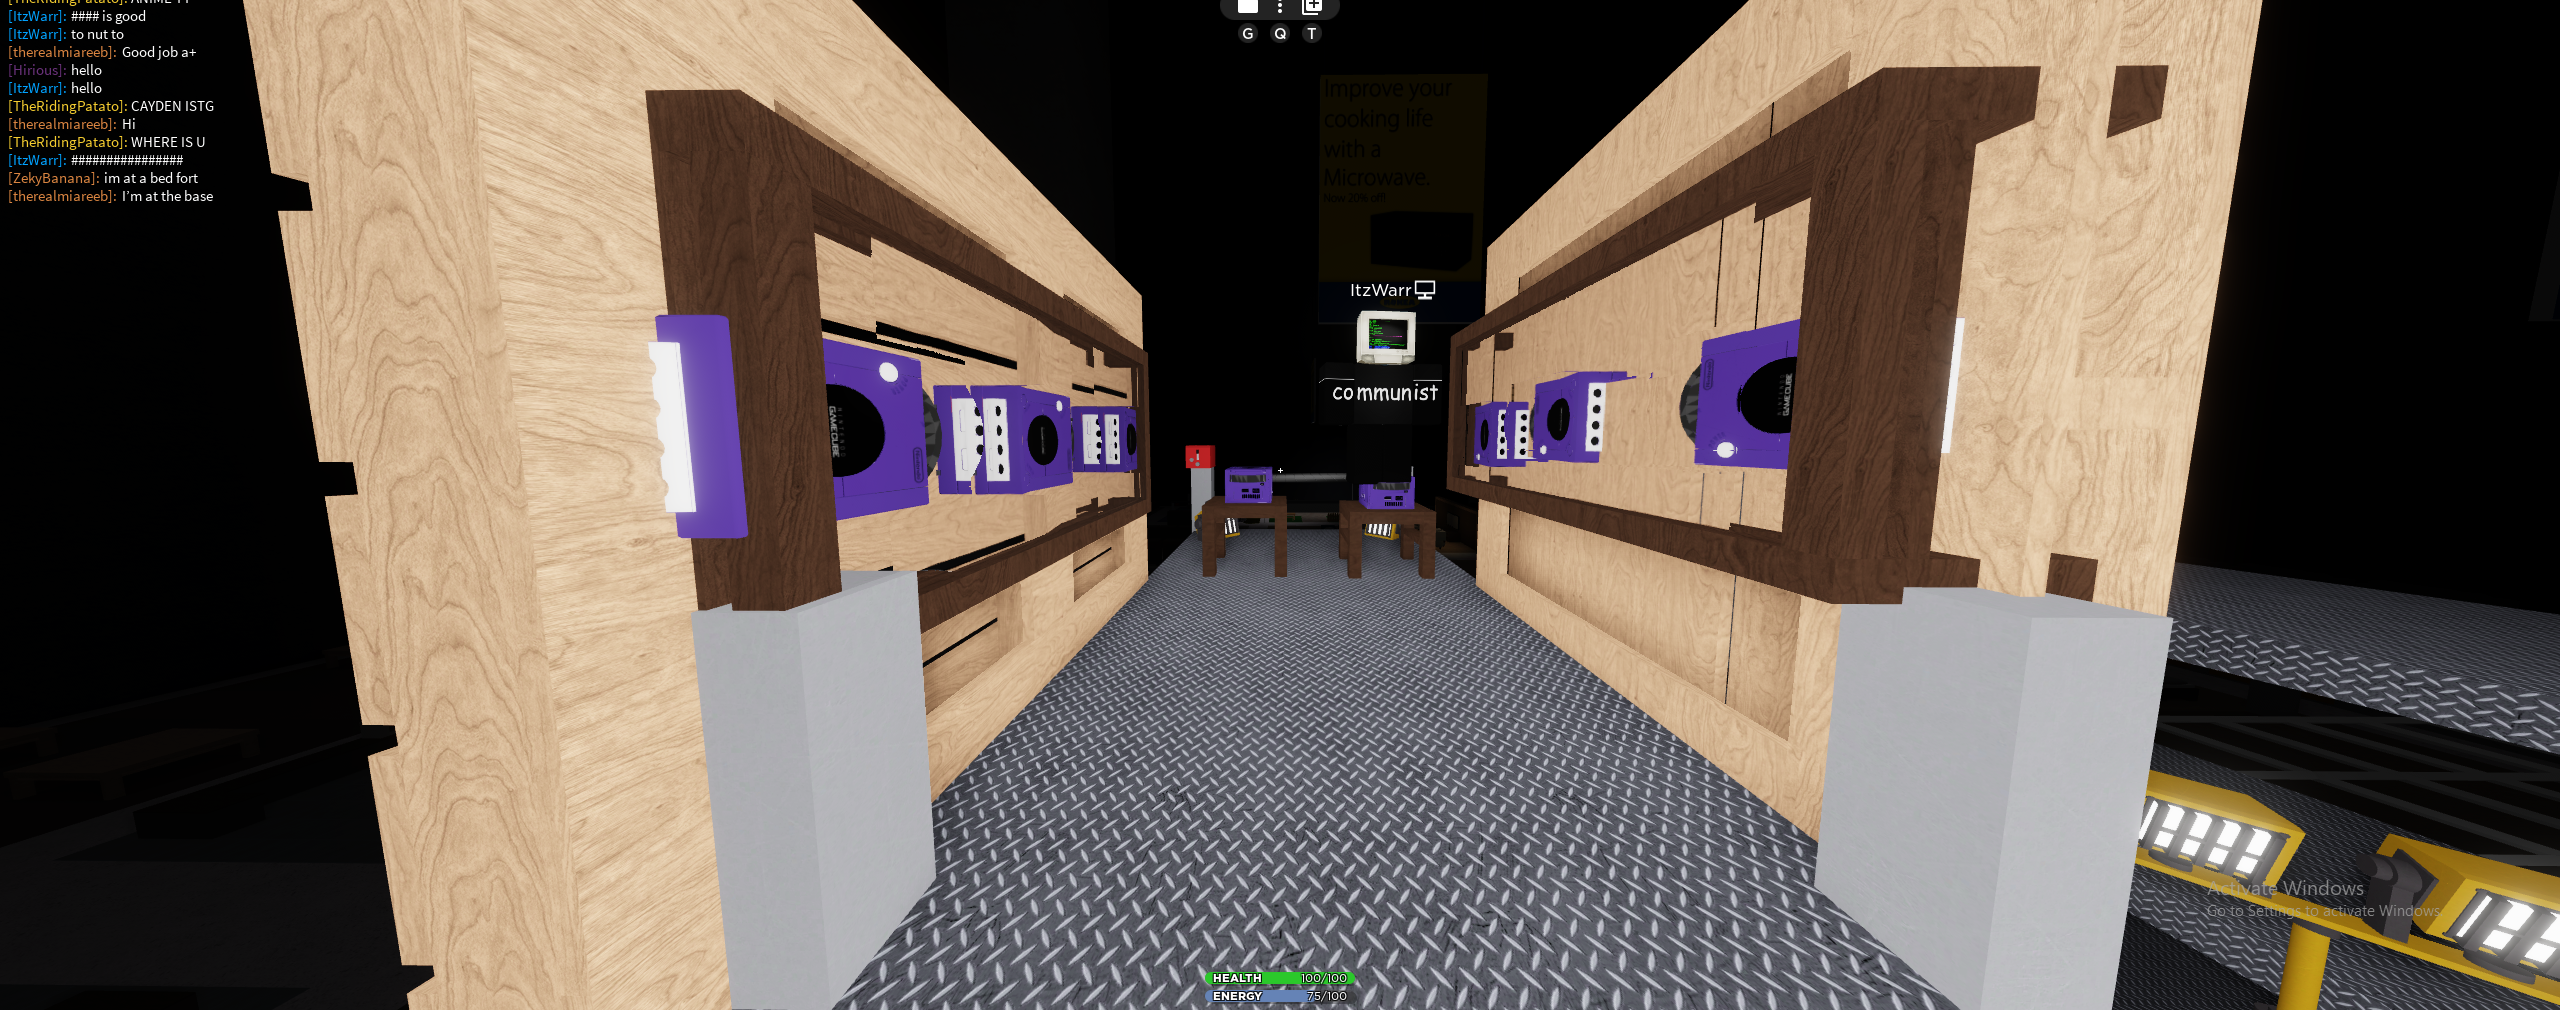 Found a gamecube, they're rare too! (Roblox game: SCP 3008) : r/roblox